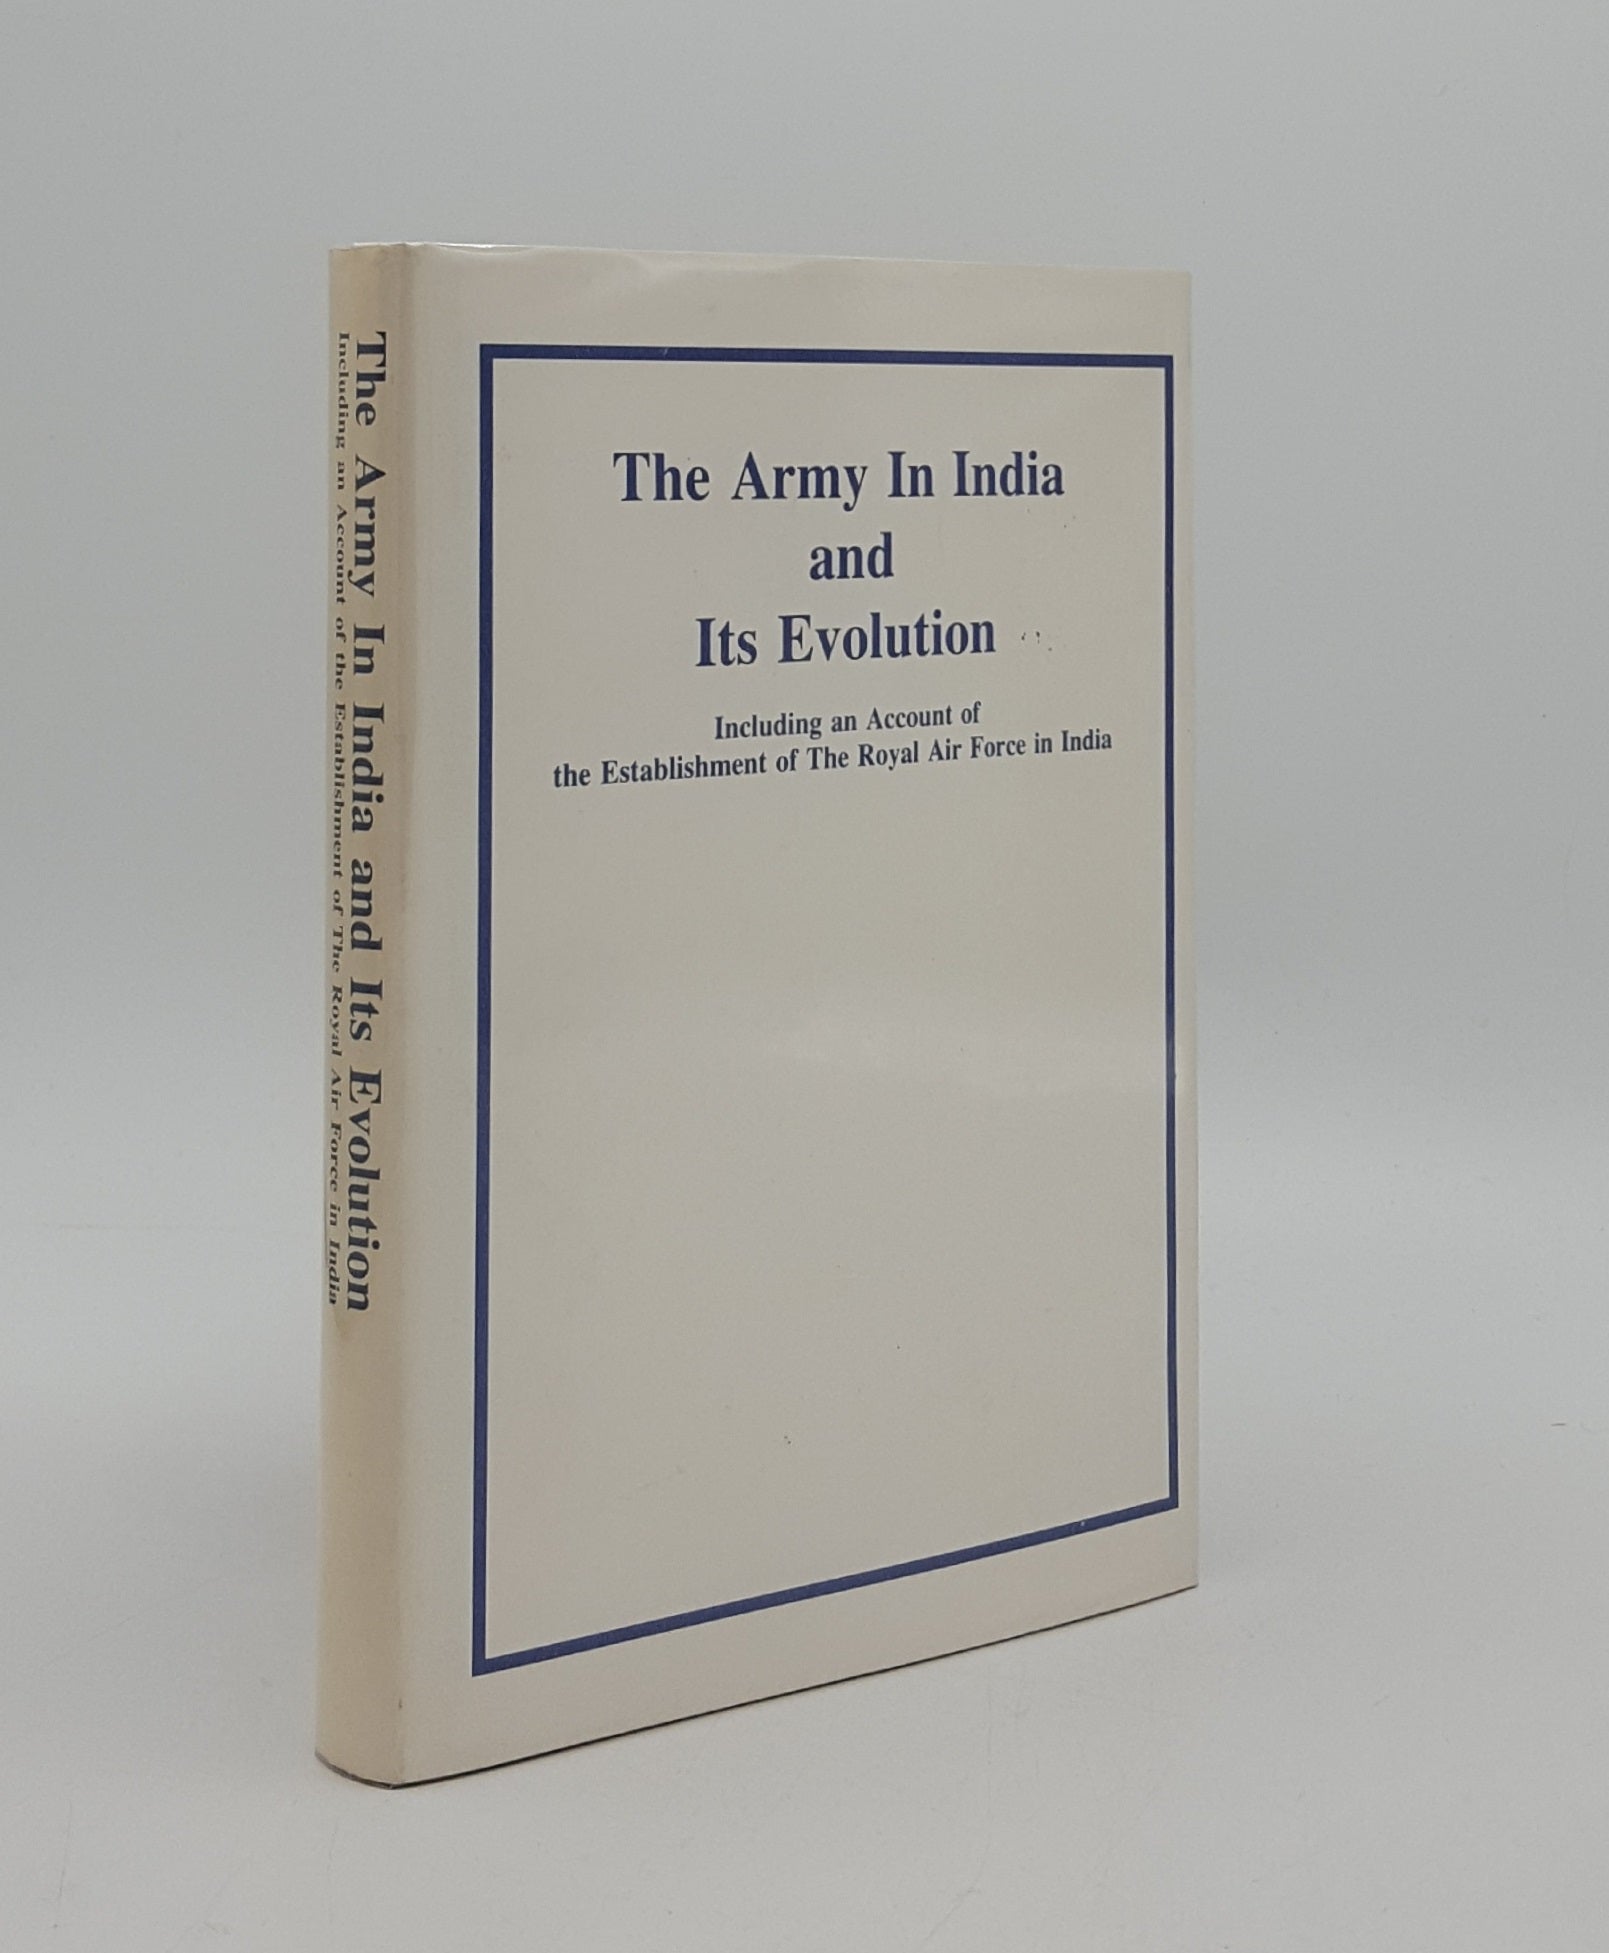 Anon - The Army in India and Its Evolution Including an Account of the Establishment of the Royal Air Force in India